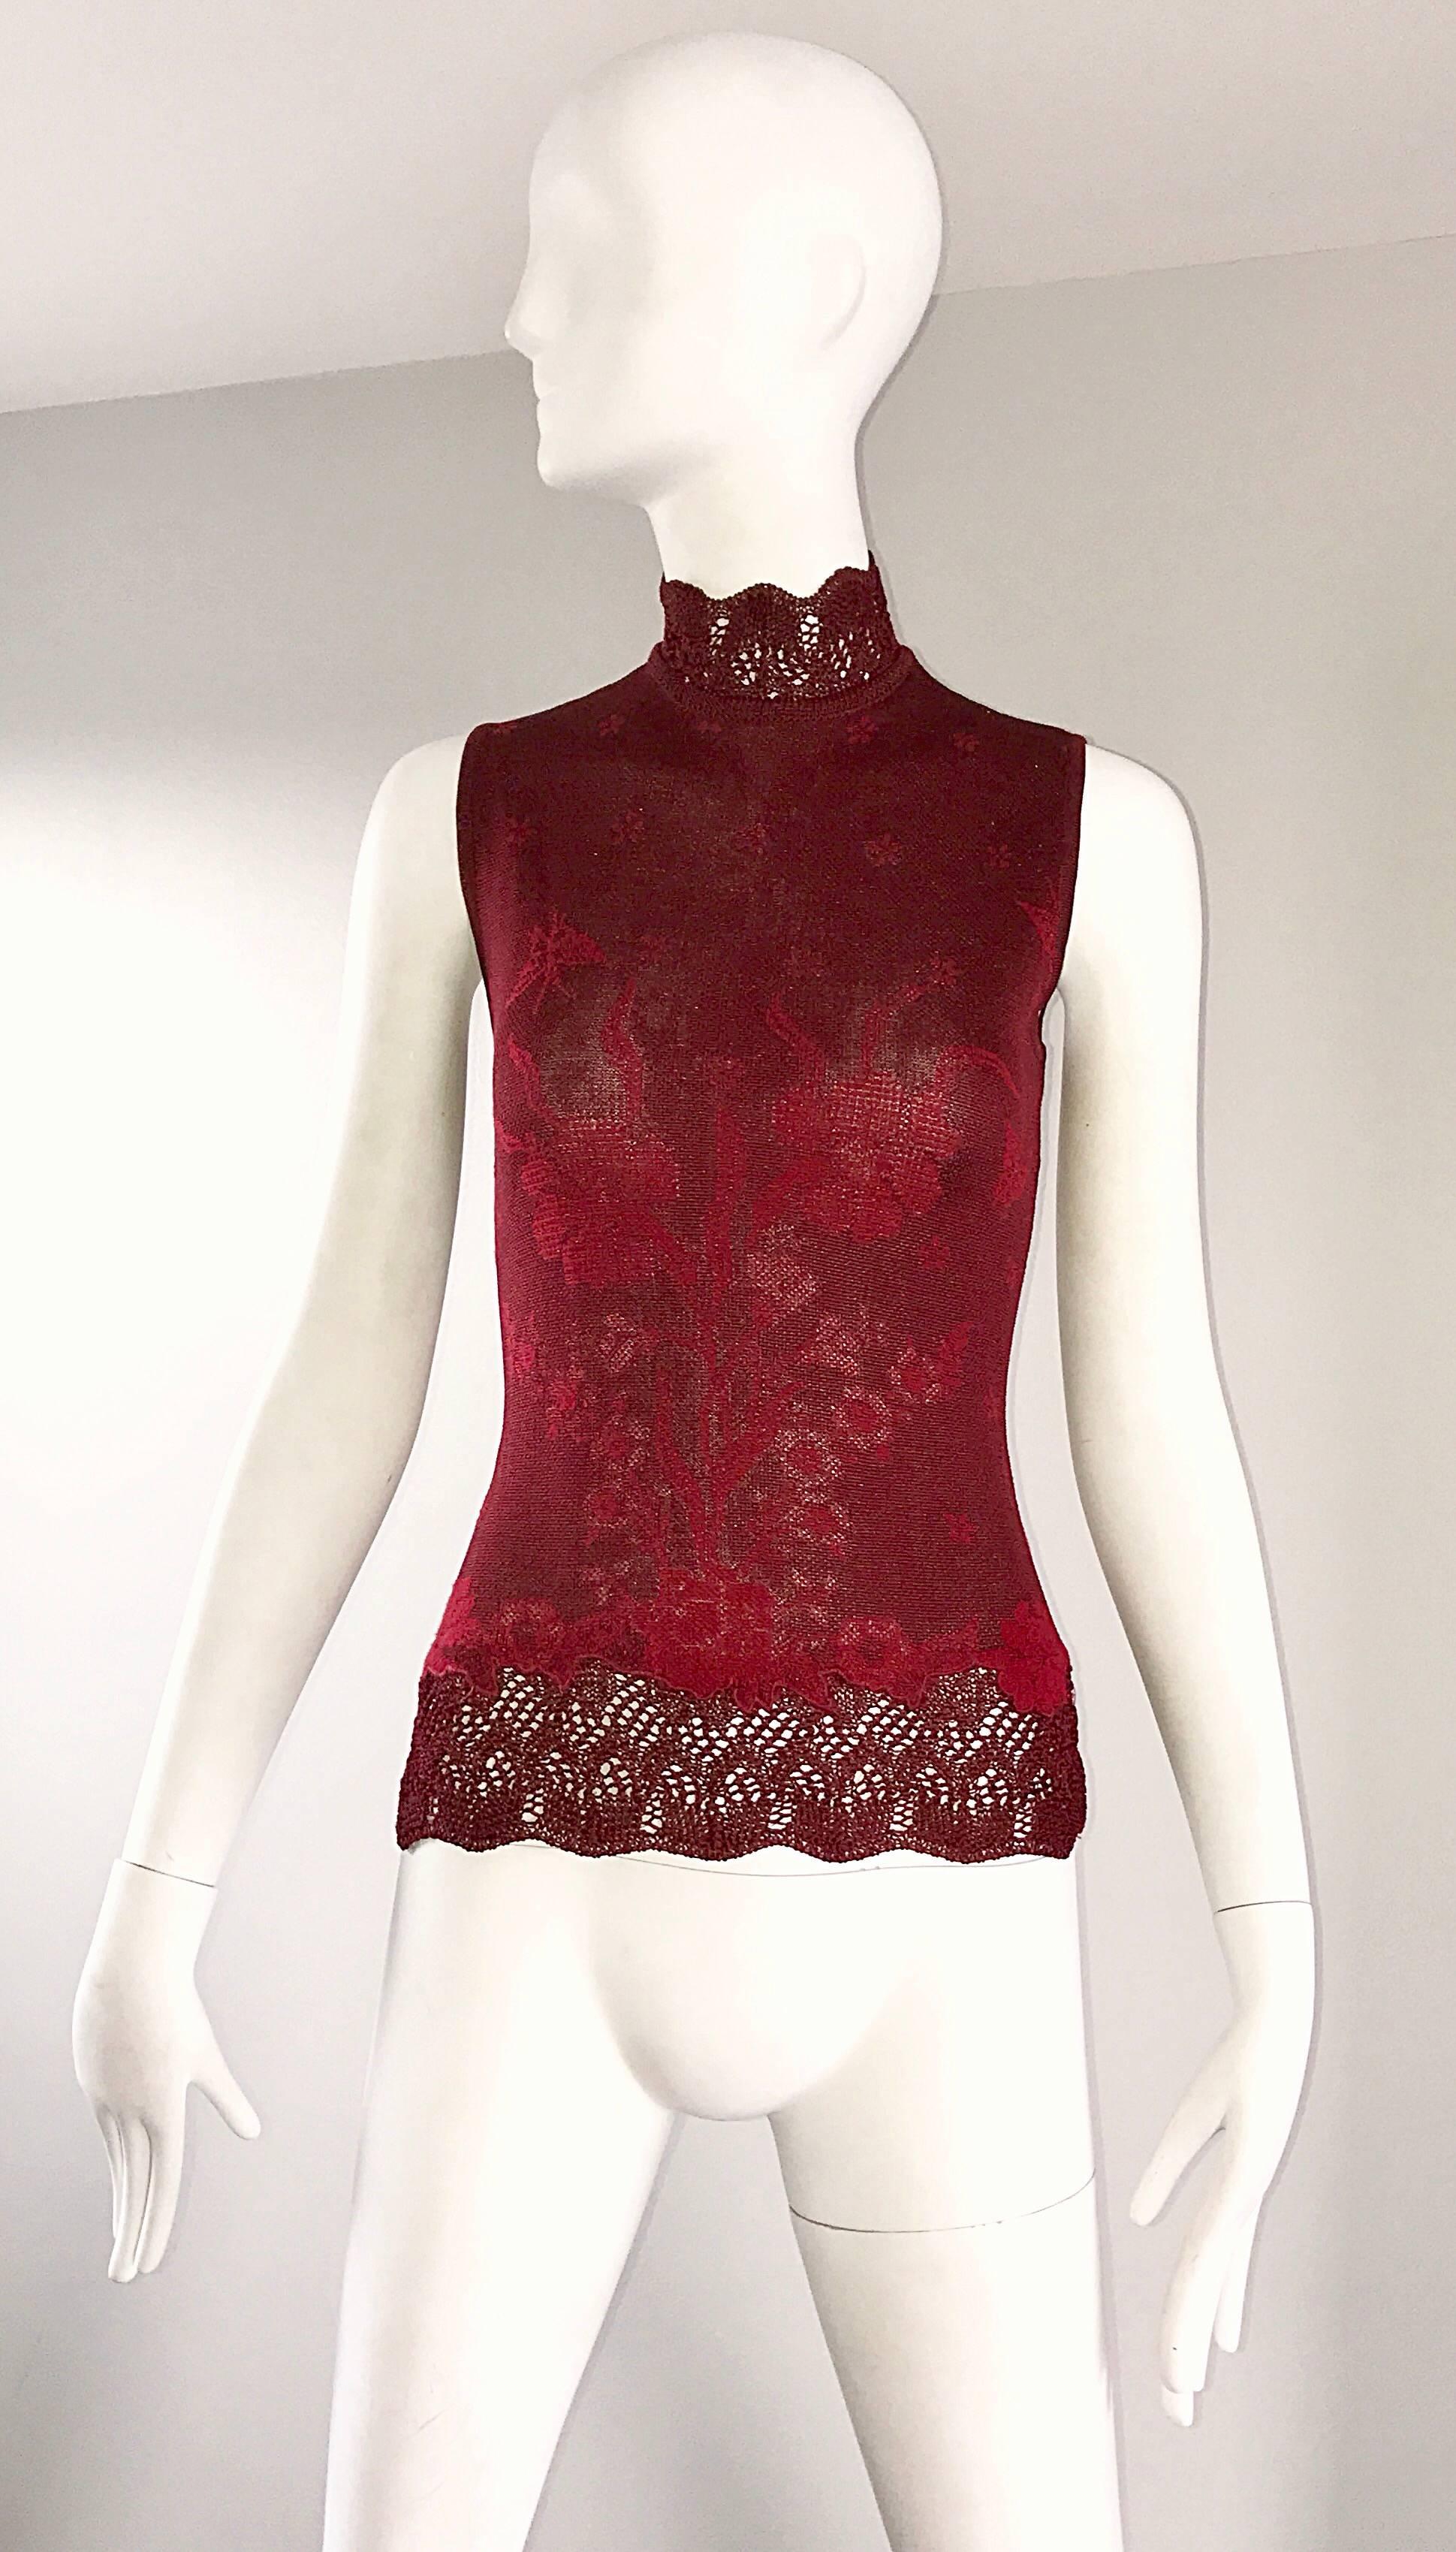 Beautiful vintage 90s KENZO red wine colored Asian inspired sleeveless blouse! Features butterflies and flowers throughout. Hand crochet work at the high collar and hem. Rayon knit blend stretches to fit the body. Buttons up the back collar. Can